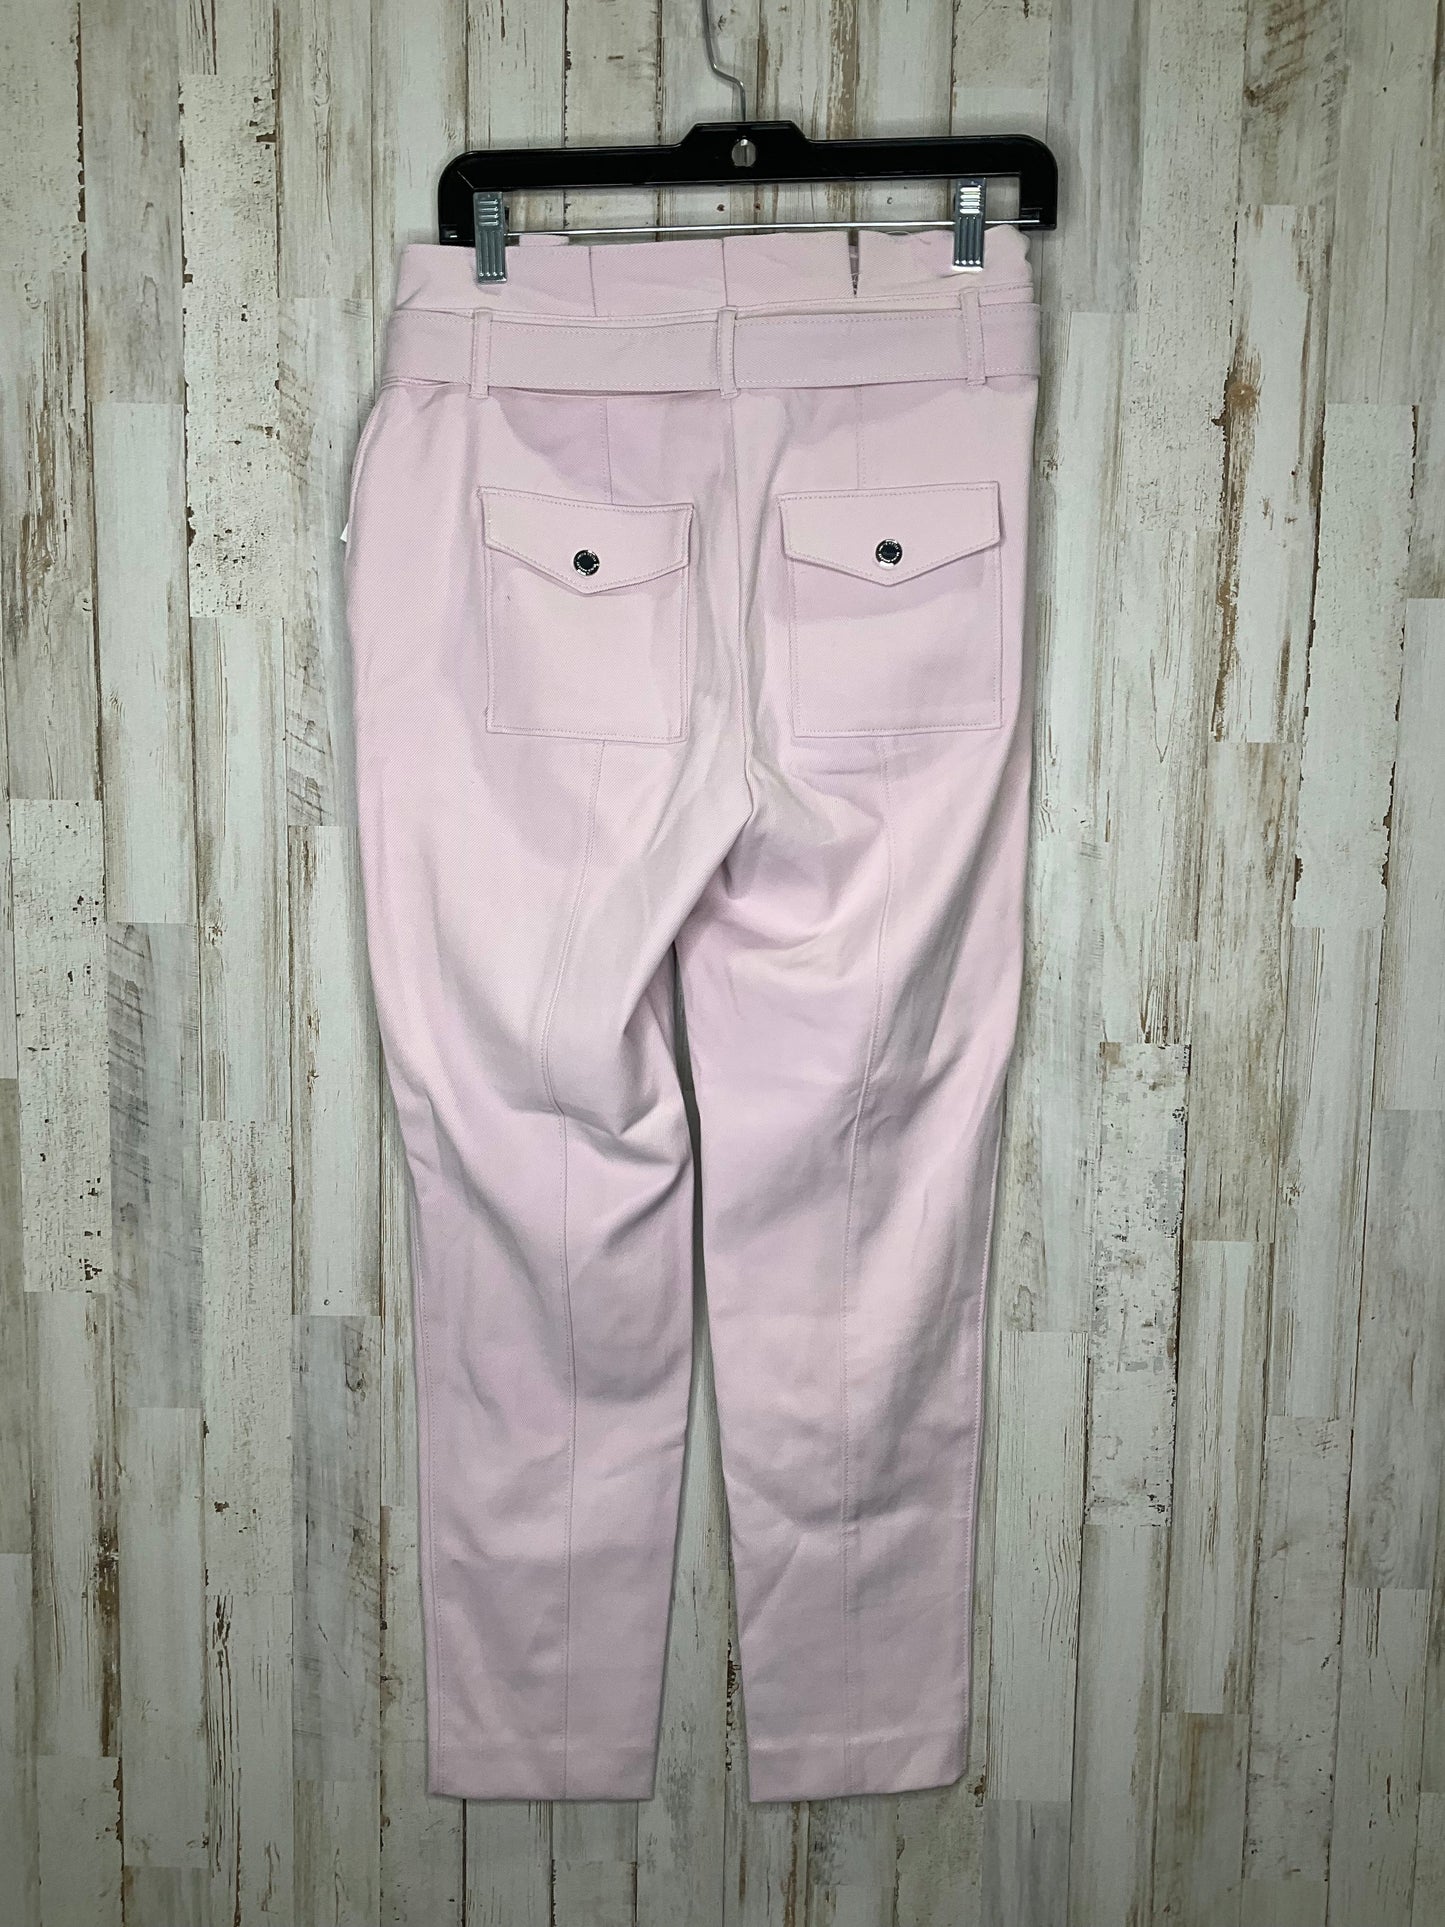 Pants Ankle By White House Black Market  Size: 2